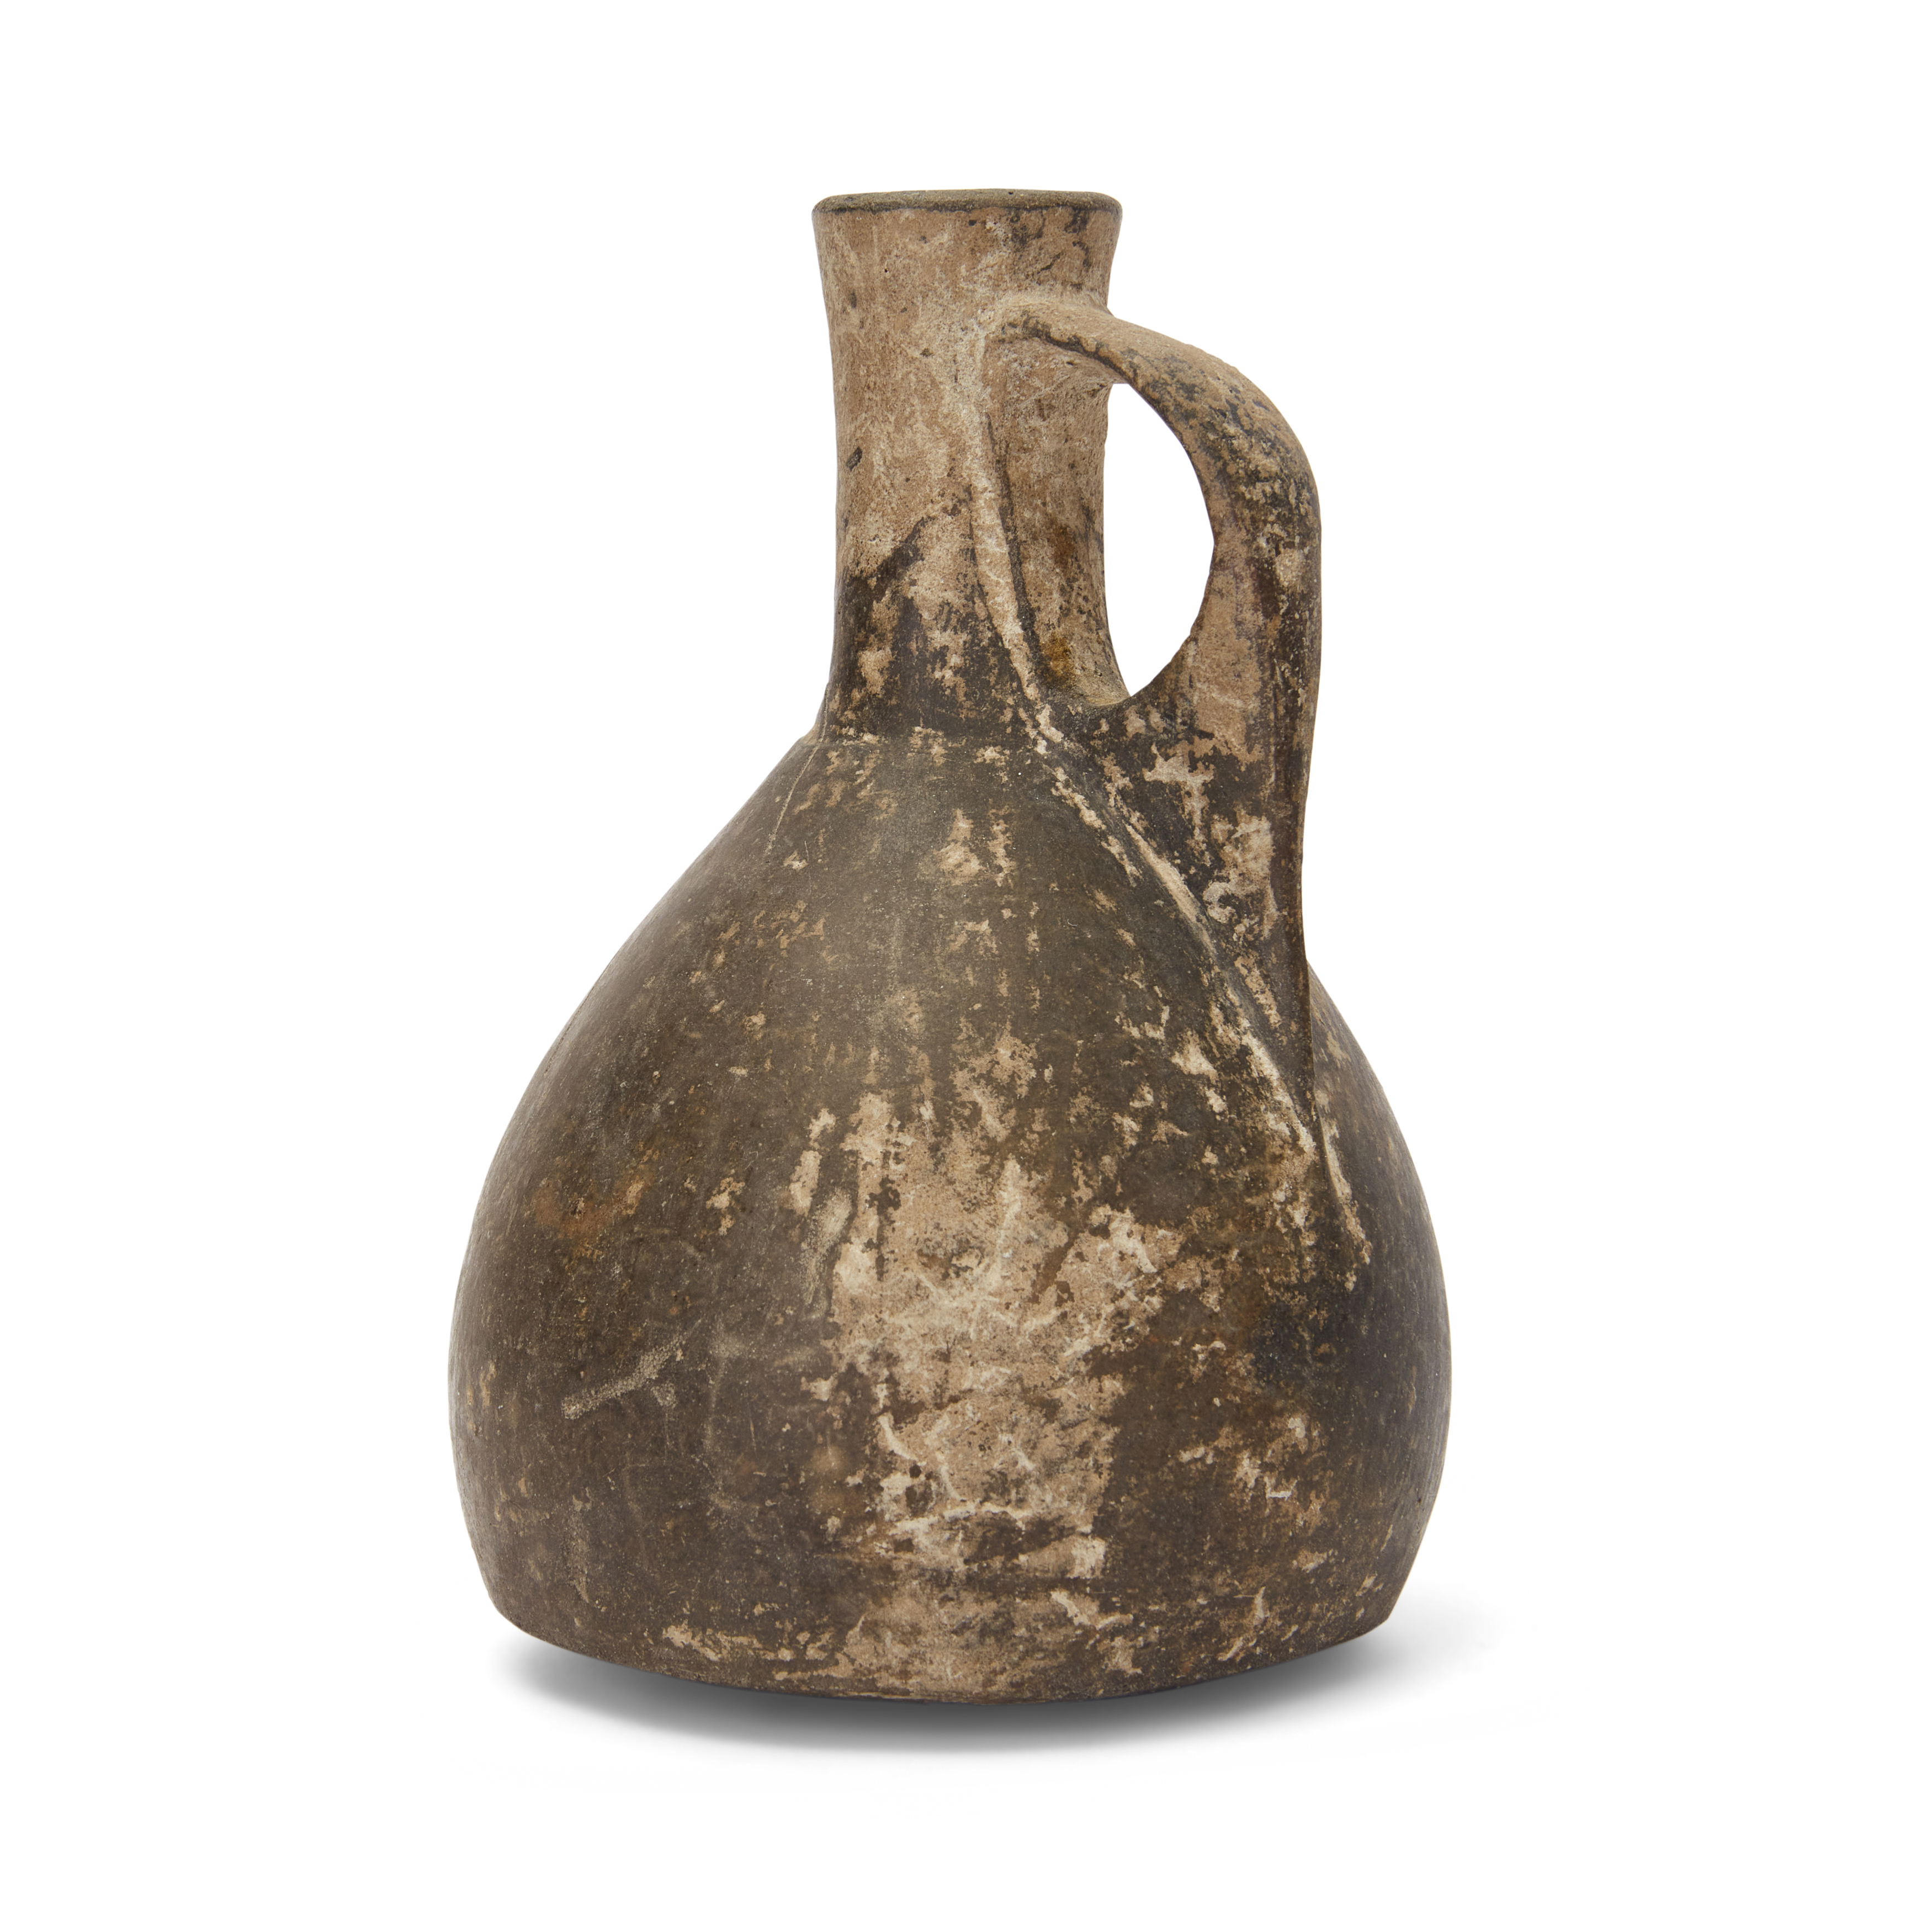 A Private UK Collection of Ancient and Intact Pottery Lots 1-18 An intact dark grey pottery jug ... - Image 2 of 2